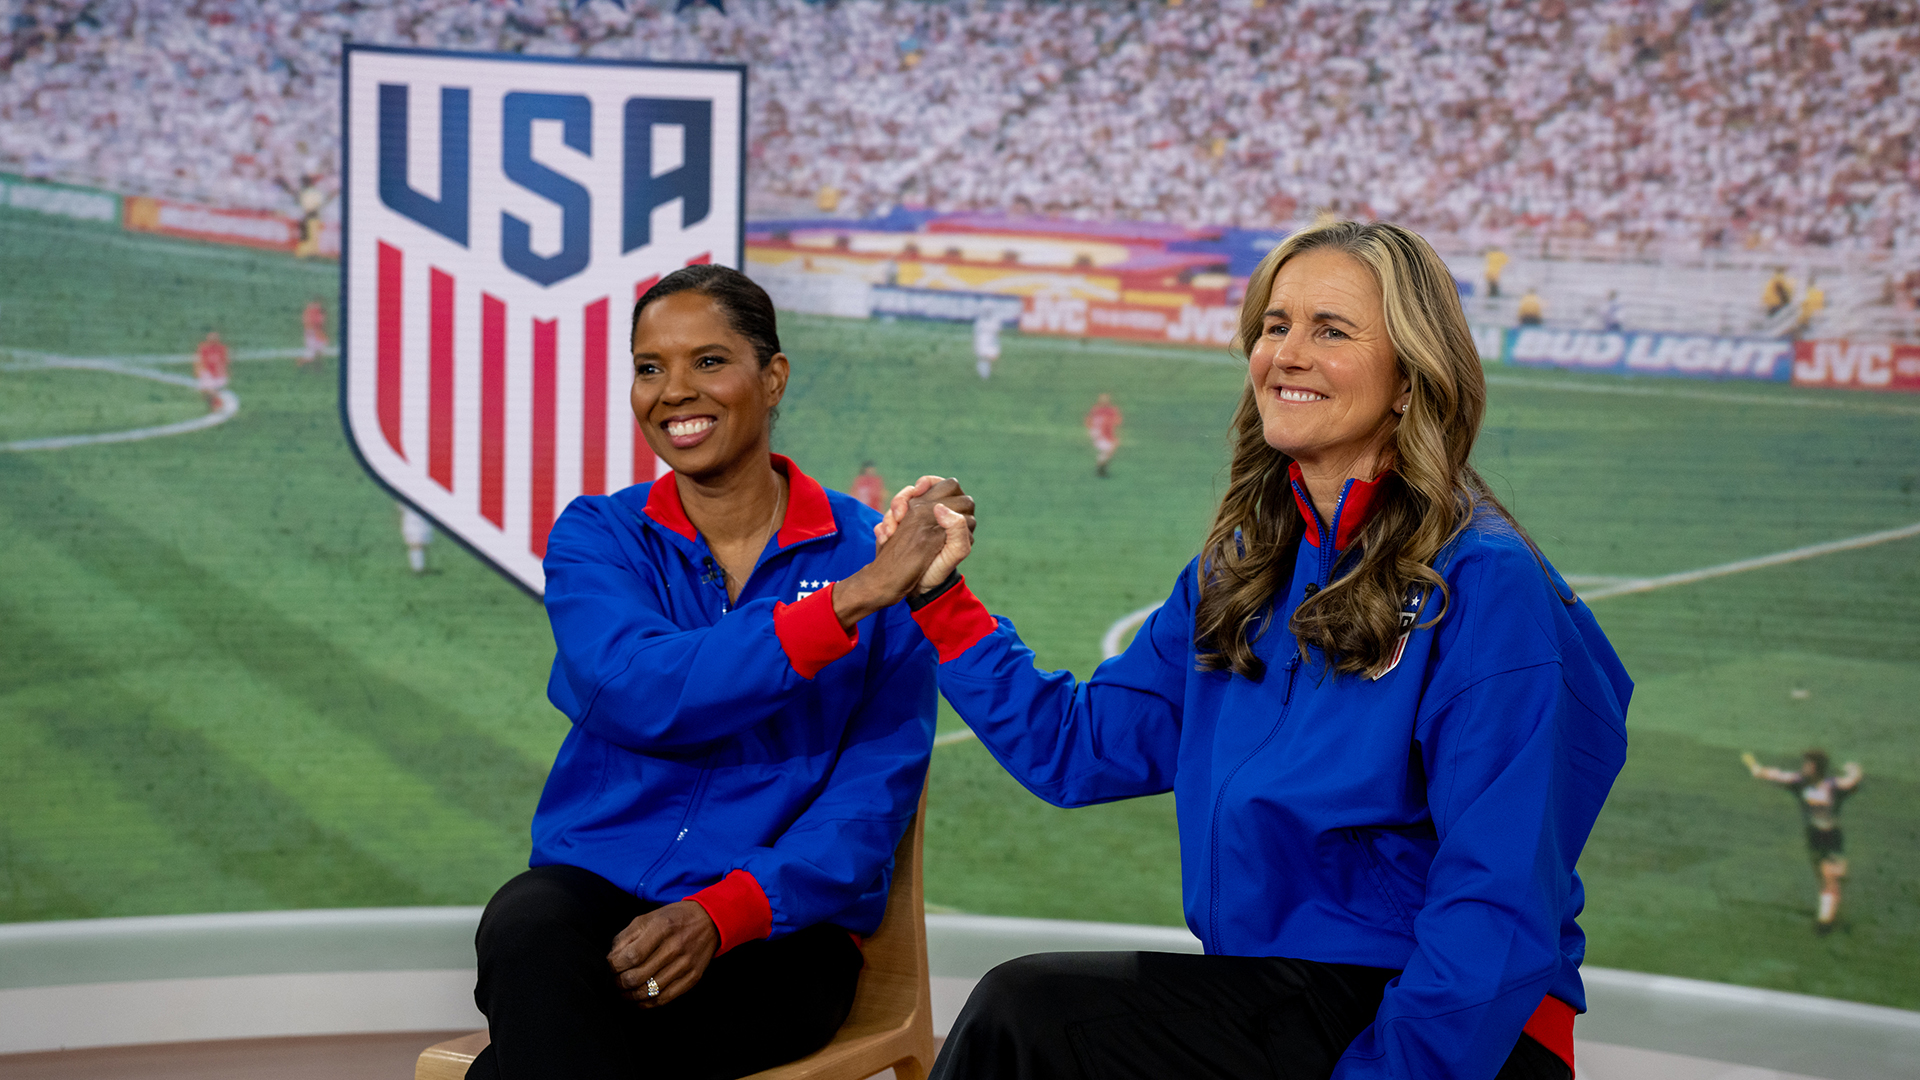 Brandi Chastain, Briana Scurry announce pre-Olympic match